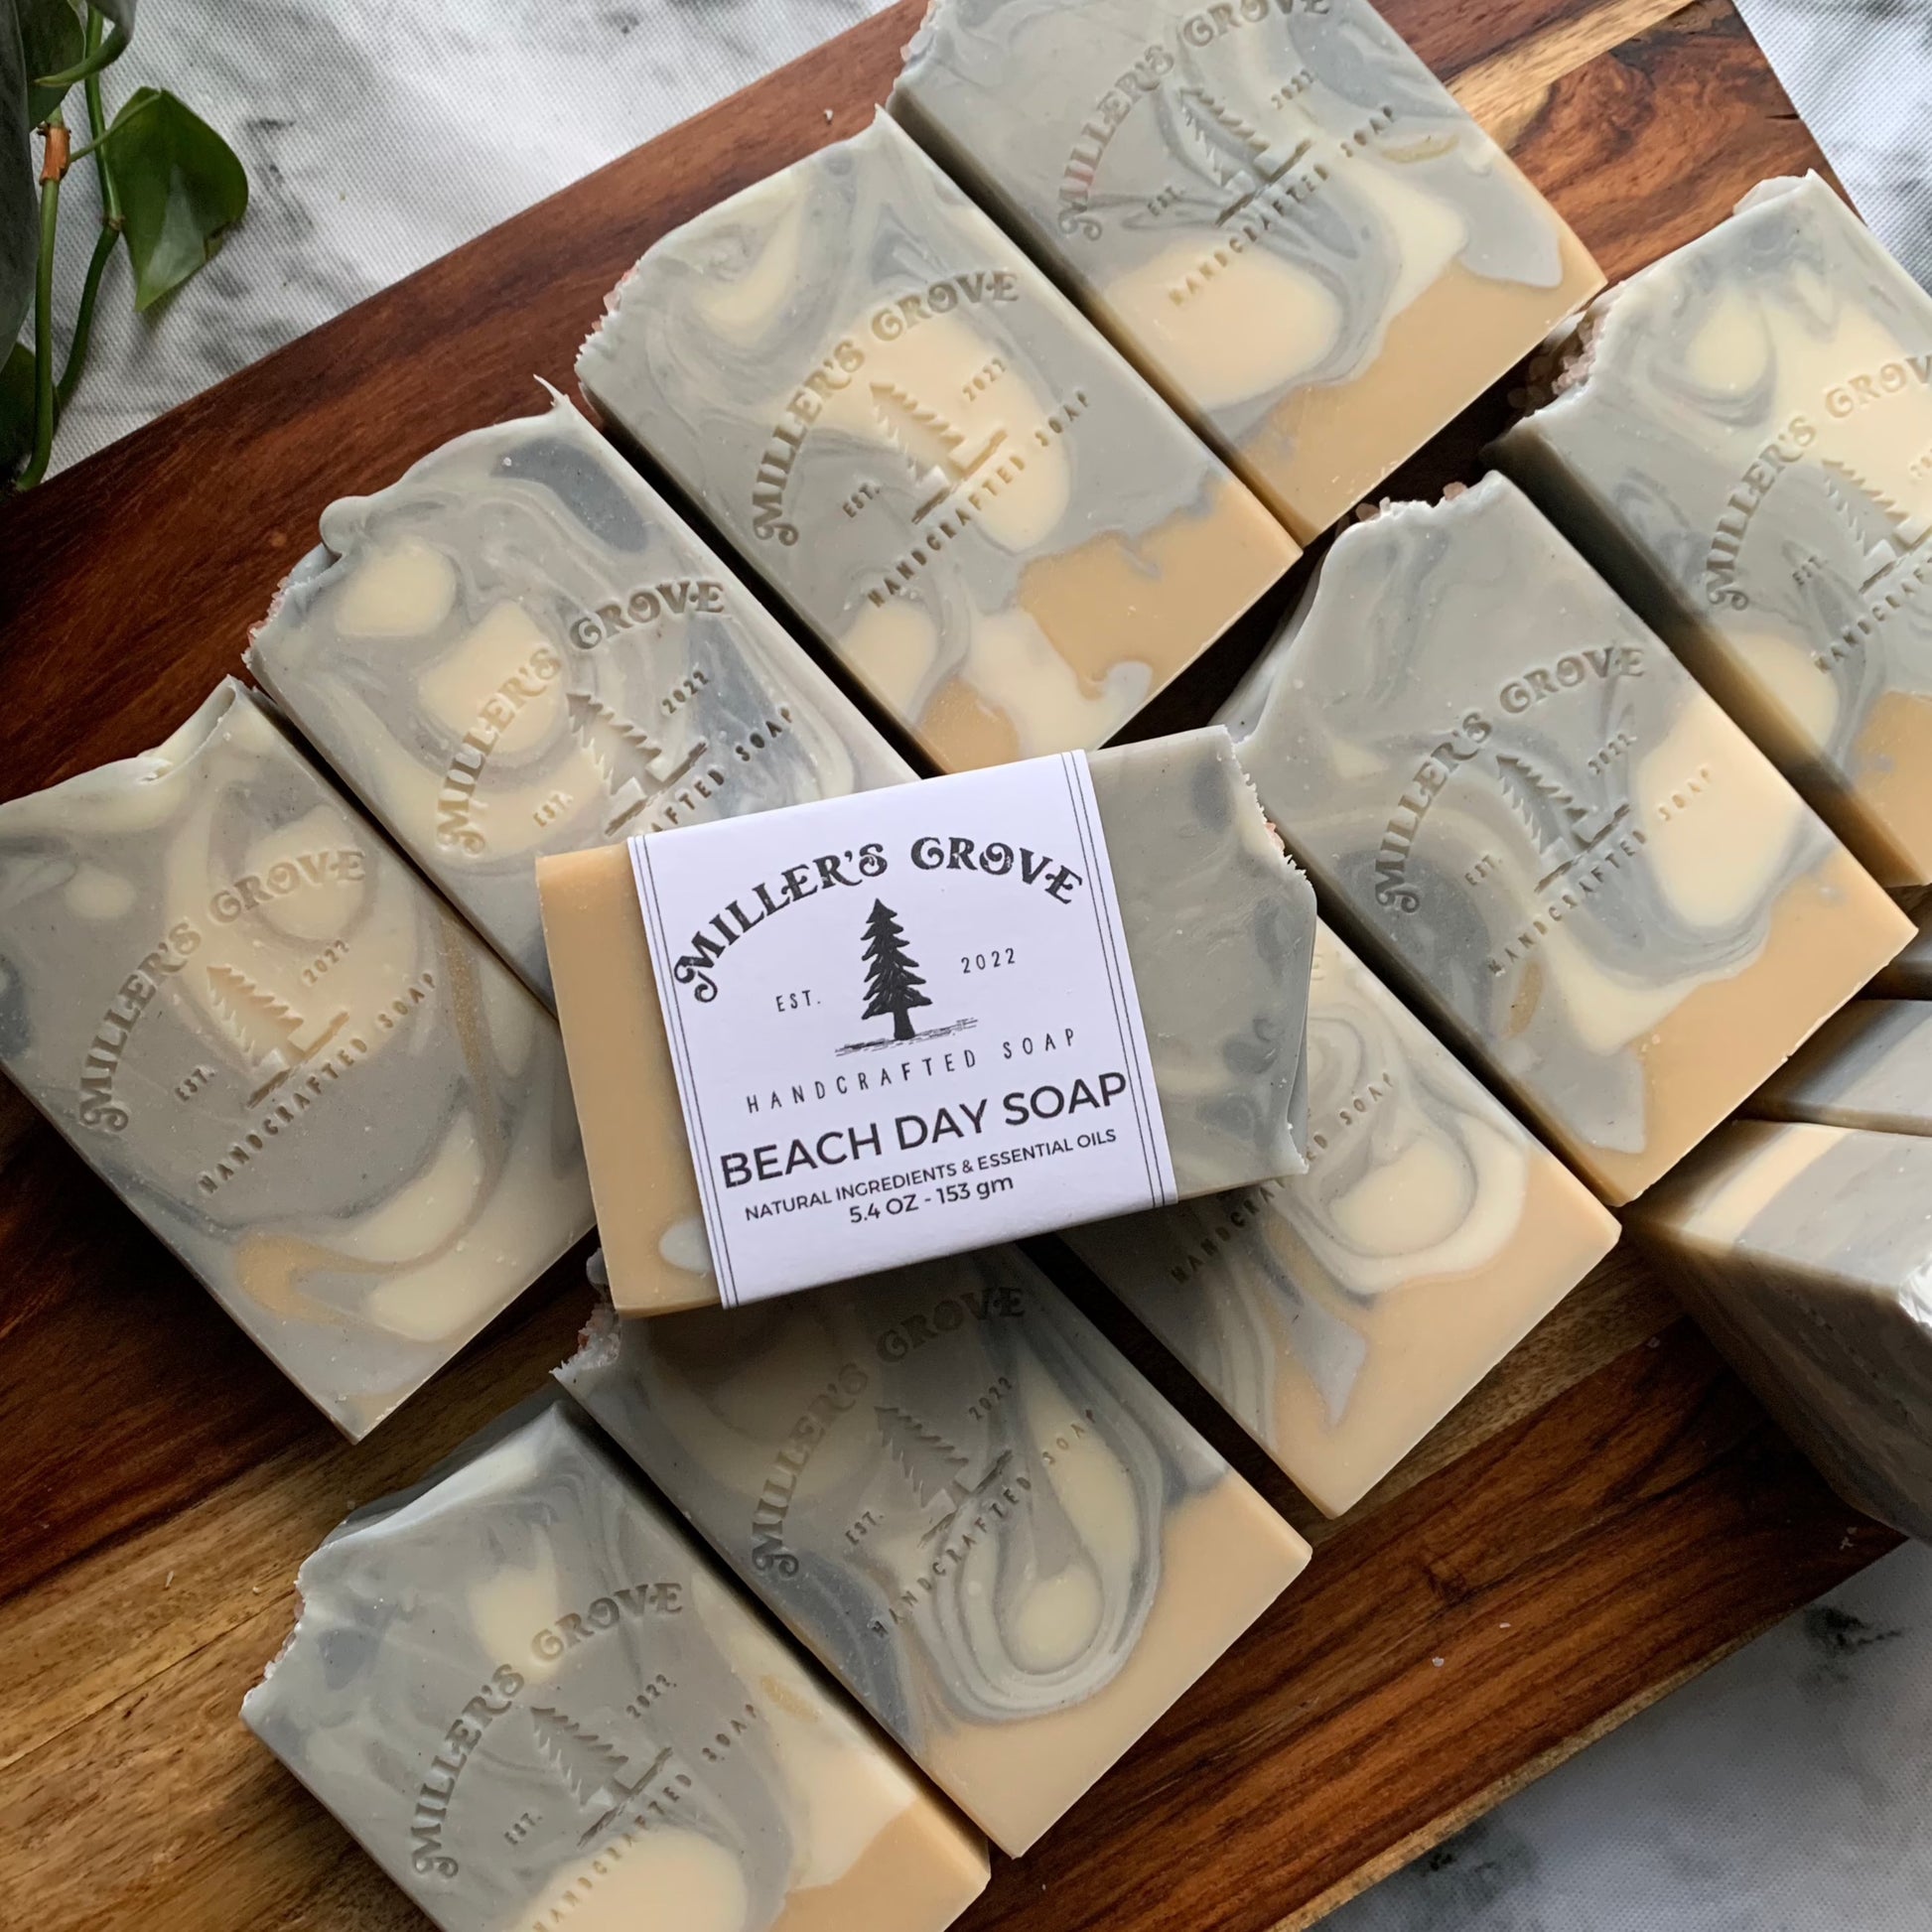 Soap bars called "beach day soap"